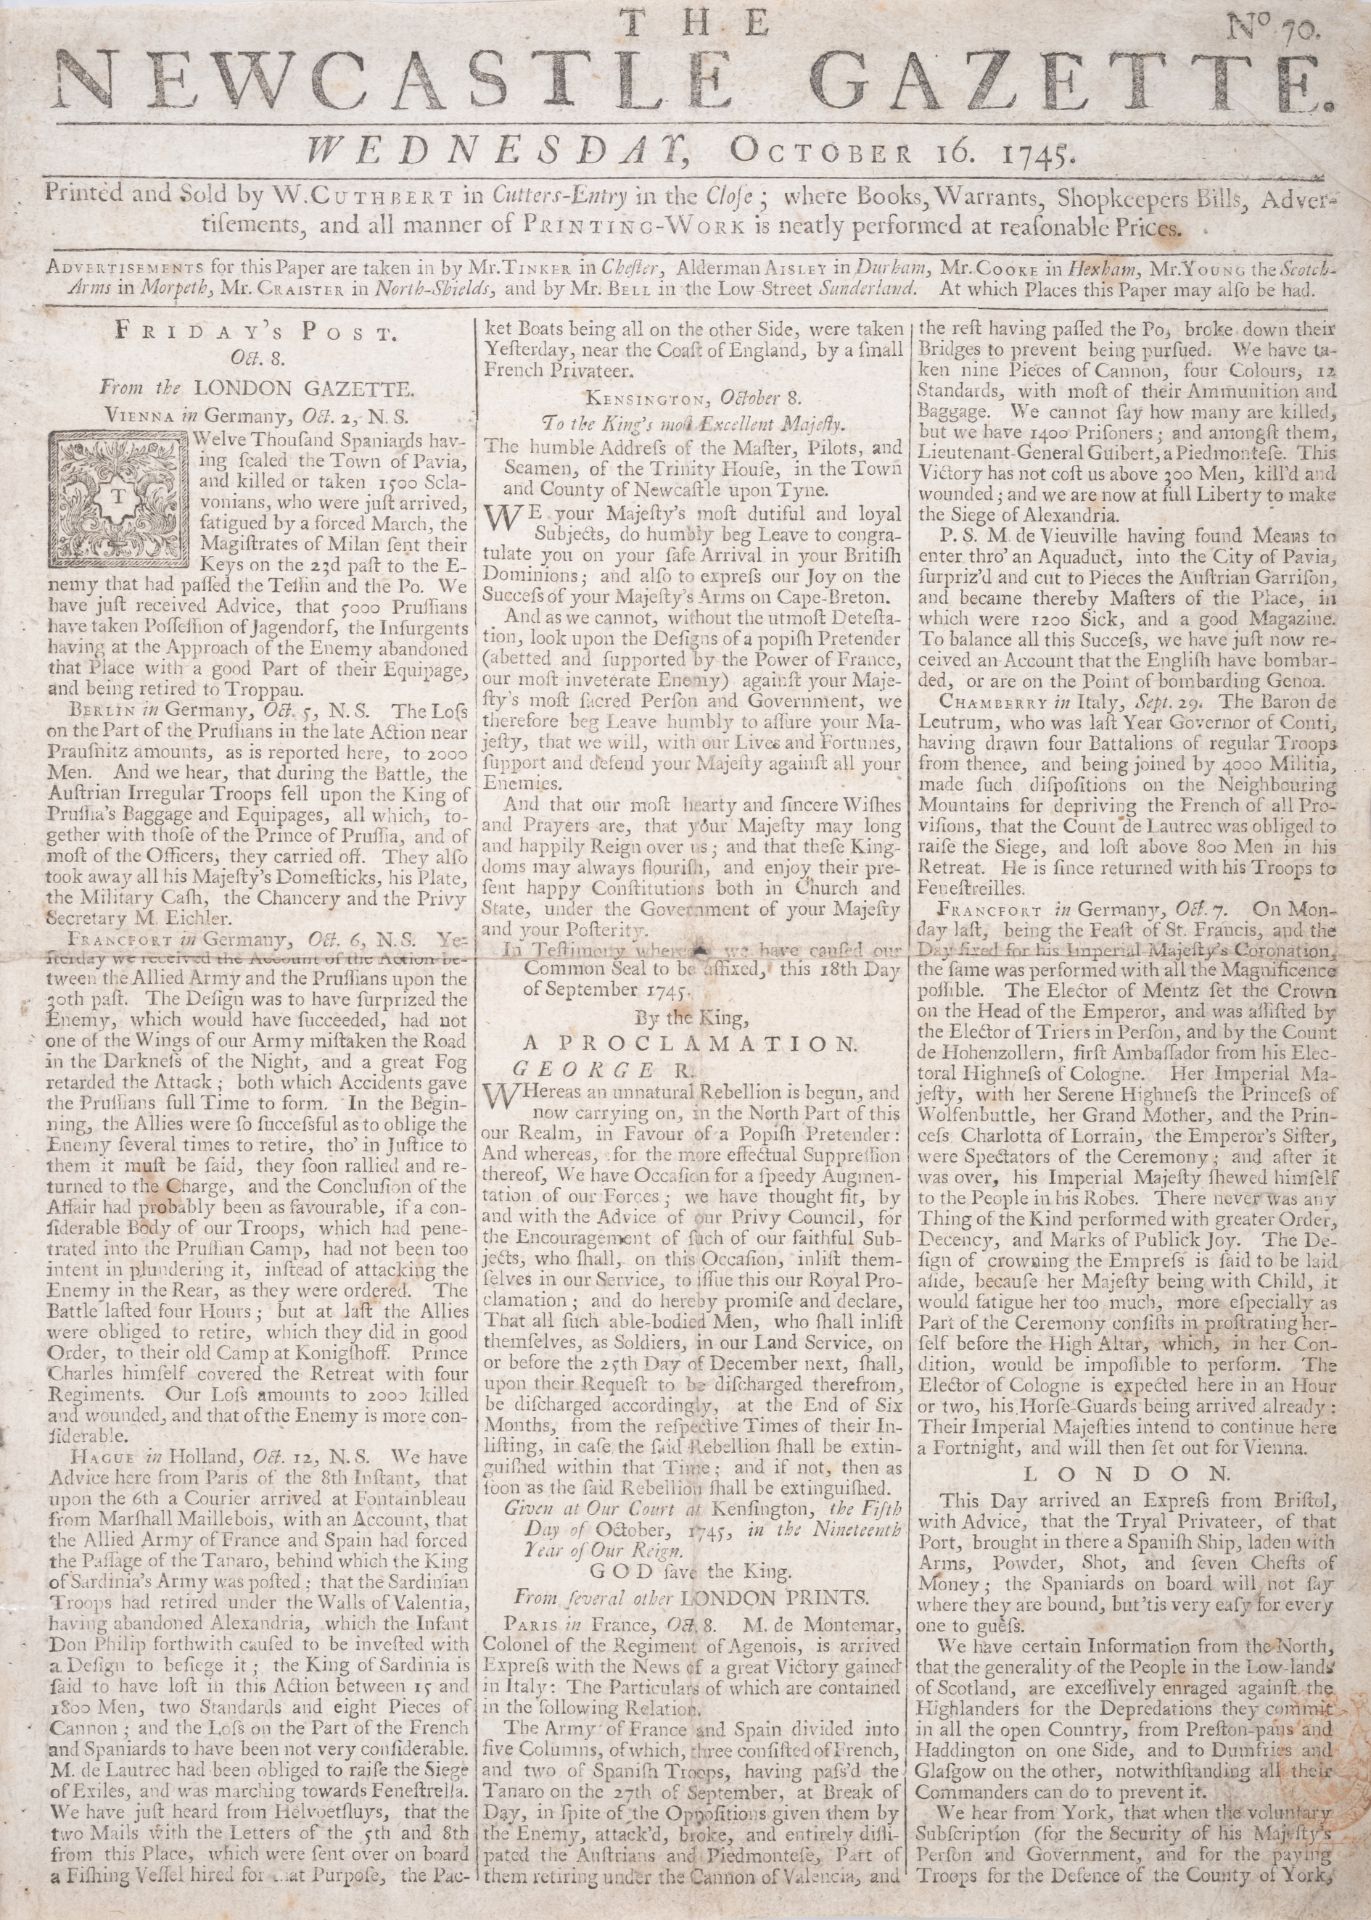 18th Century Newspapers.- [Amhurst (Nicholas)], "Caleb d'Anvers". The Country Journal; or, the Cr...